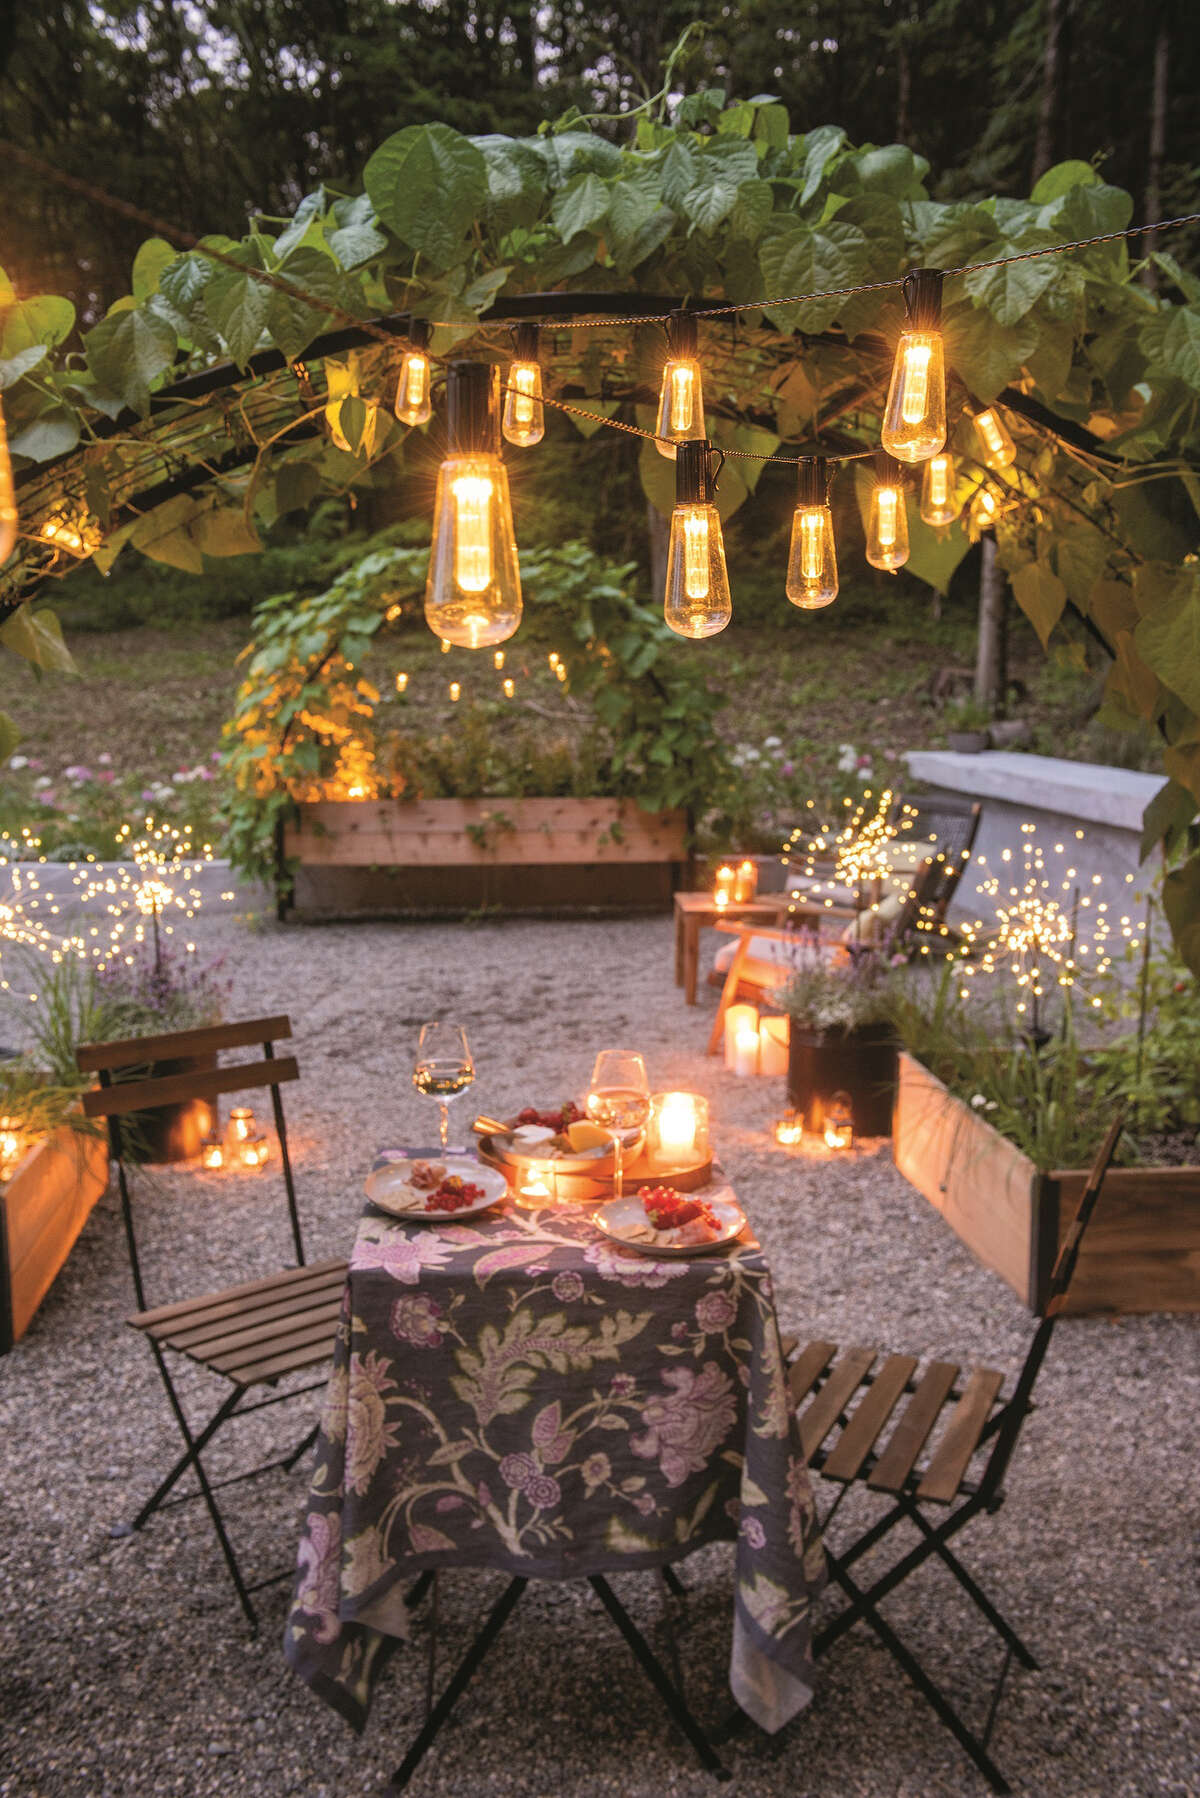 Enjoy an after-dark glow on your patio or deck with retro Edison-bulb solar lights.